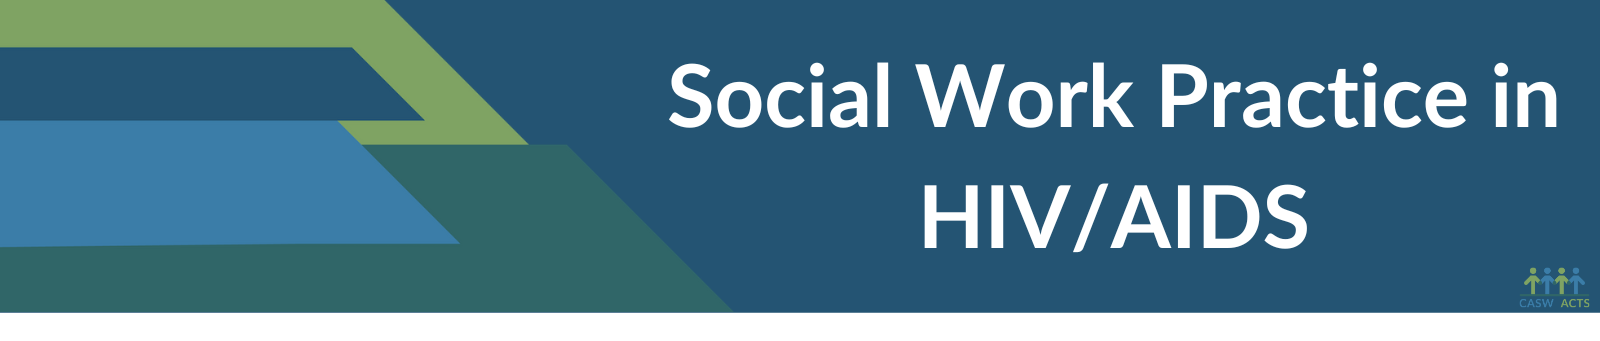 Social Work Practice in HIV/AIDS | Canadian Association of Social Workers